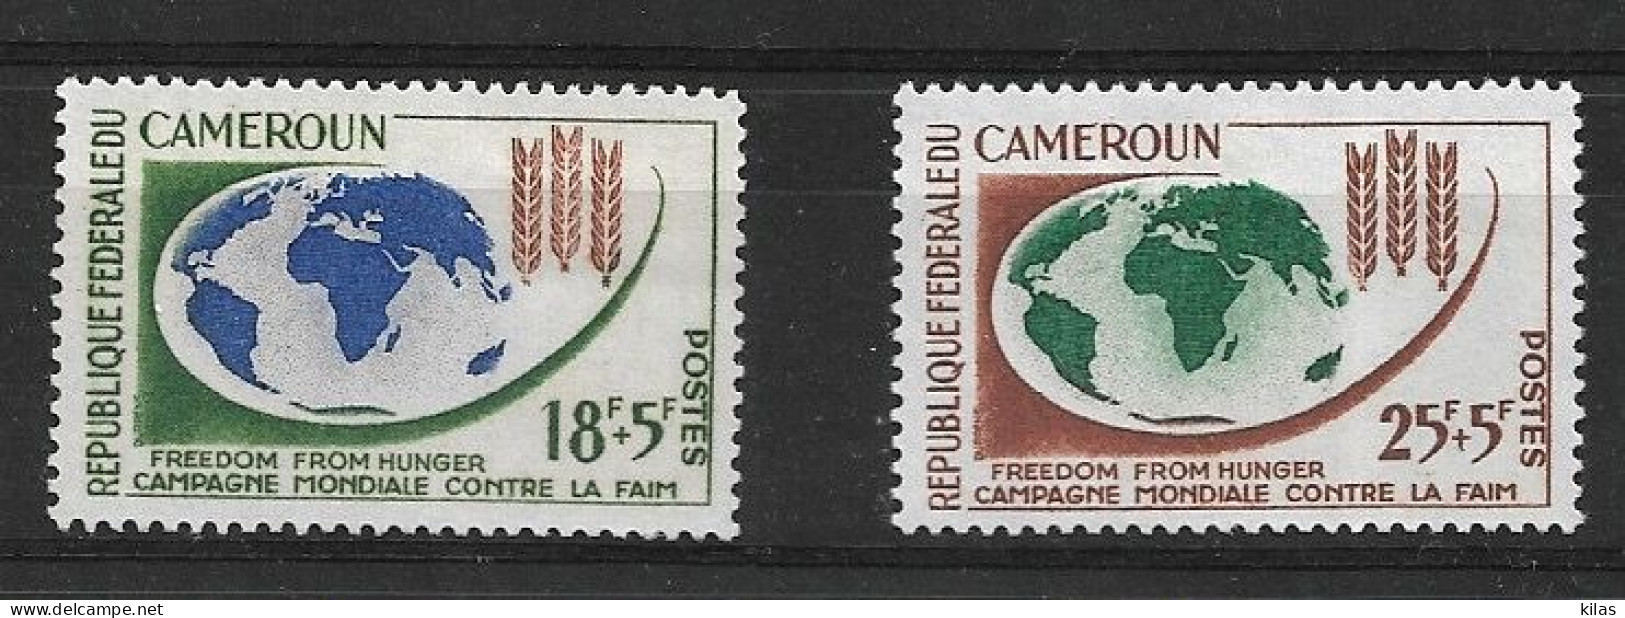 CAMEROON 1963 FREEDOM FROM HUNGER MNH - Alimentation